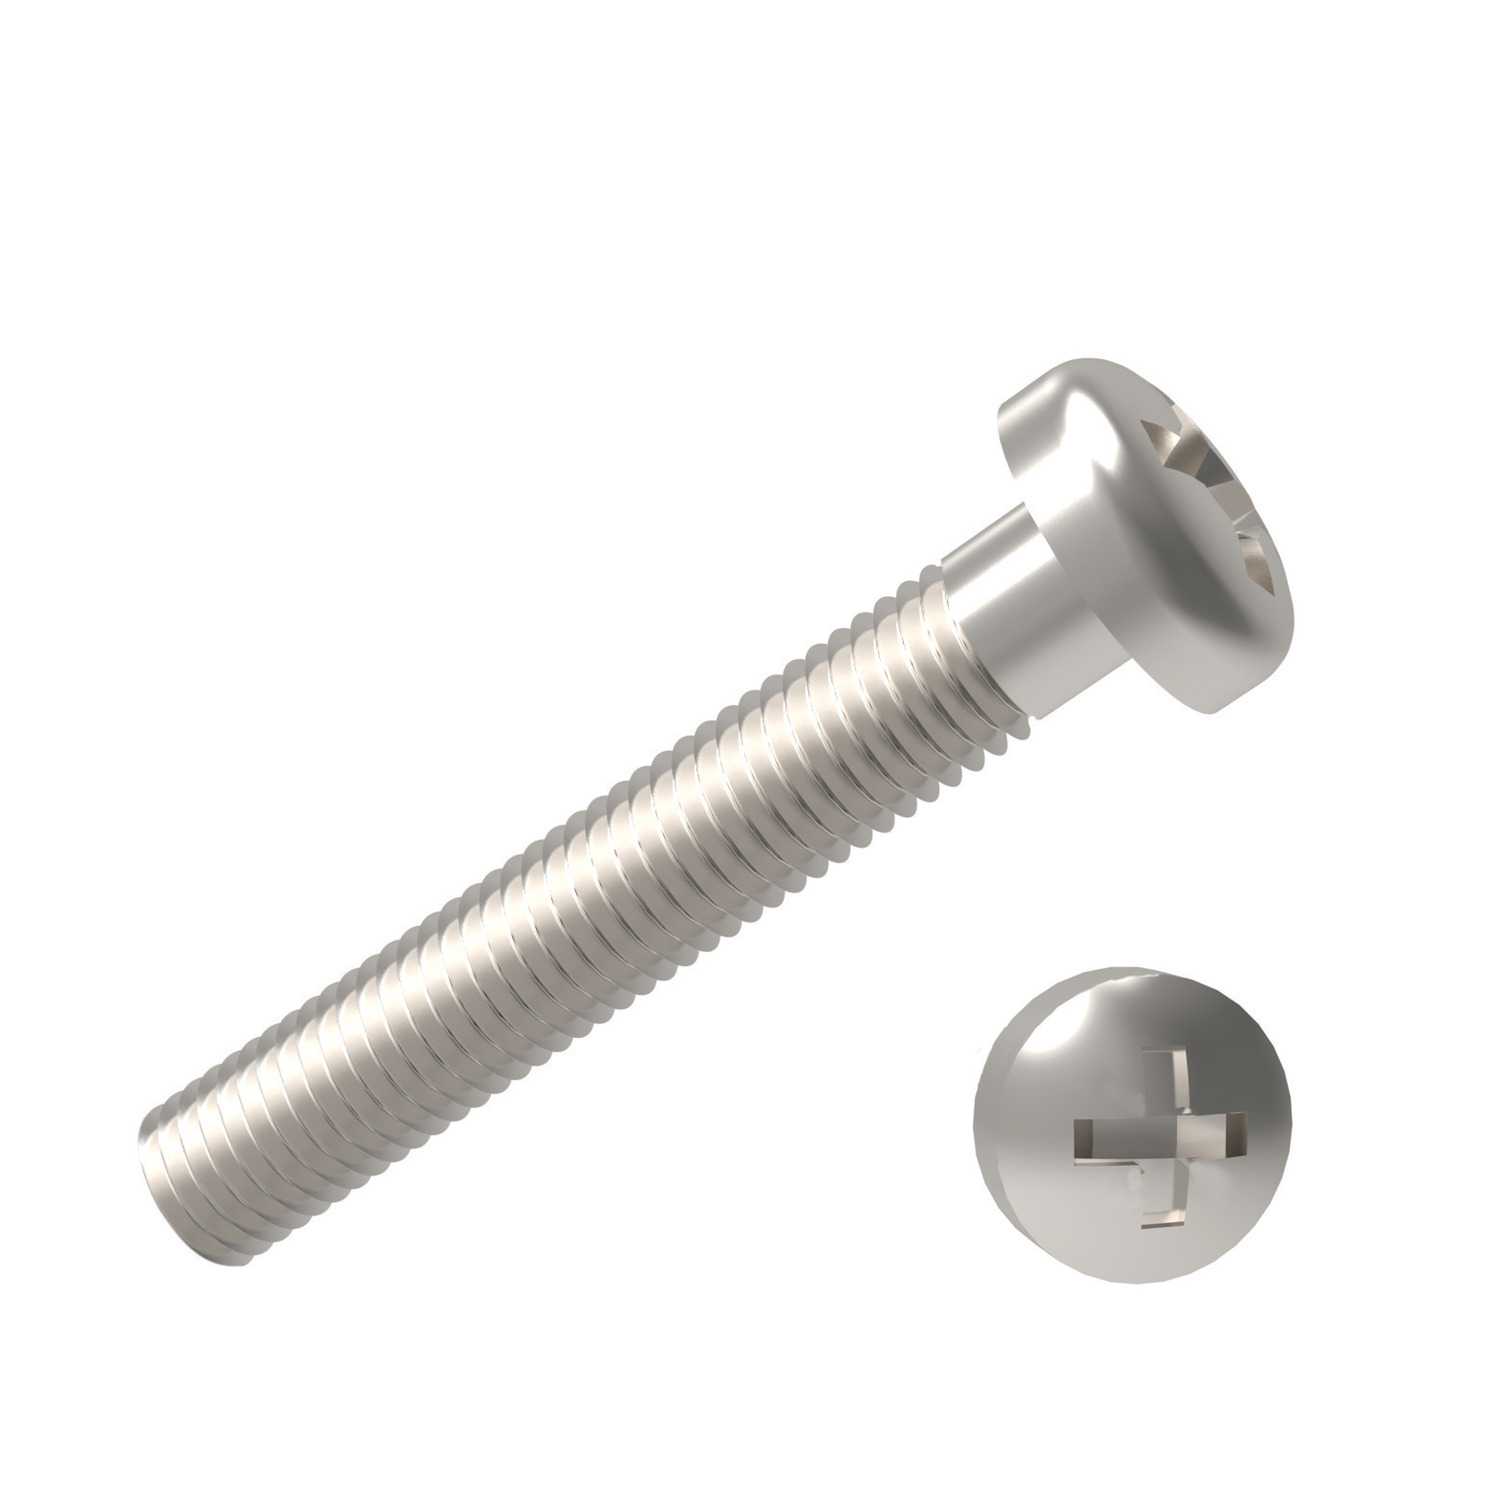 Phillips Pan Head Screws To DIN 7985 H, ISO 7045. Threaded within 2,5 x pitch of head